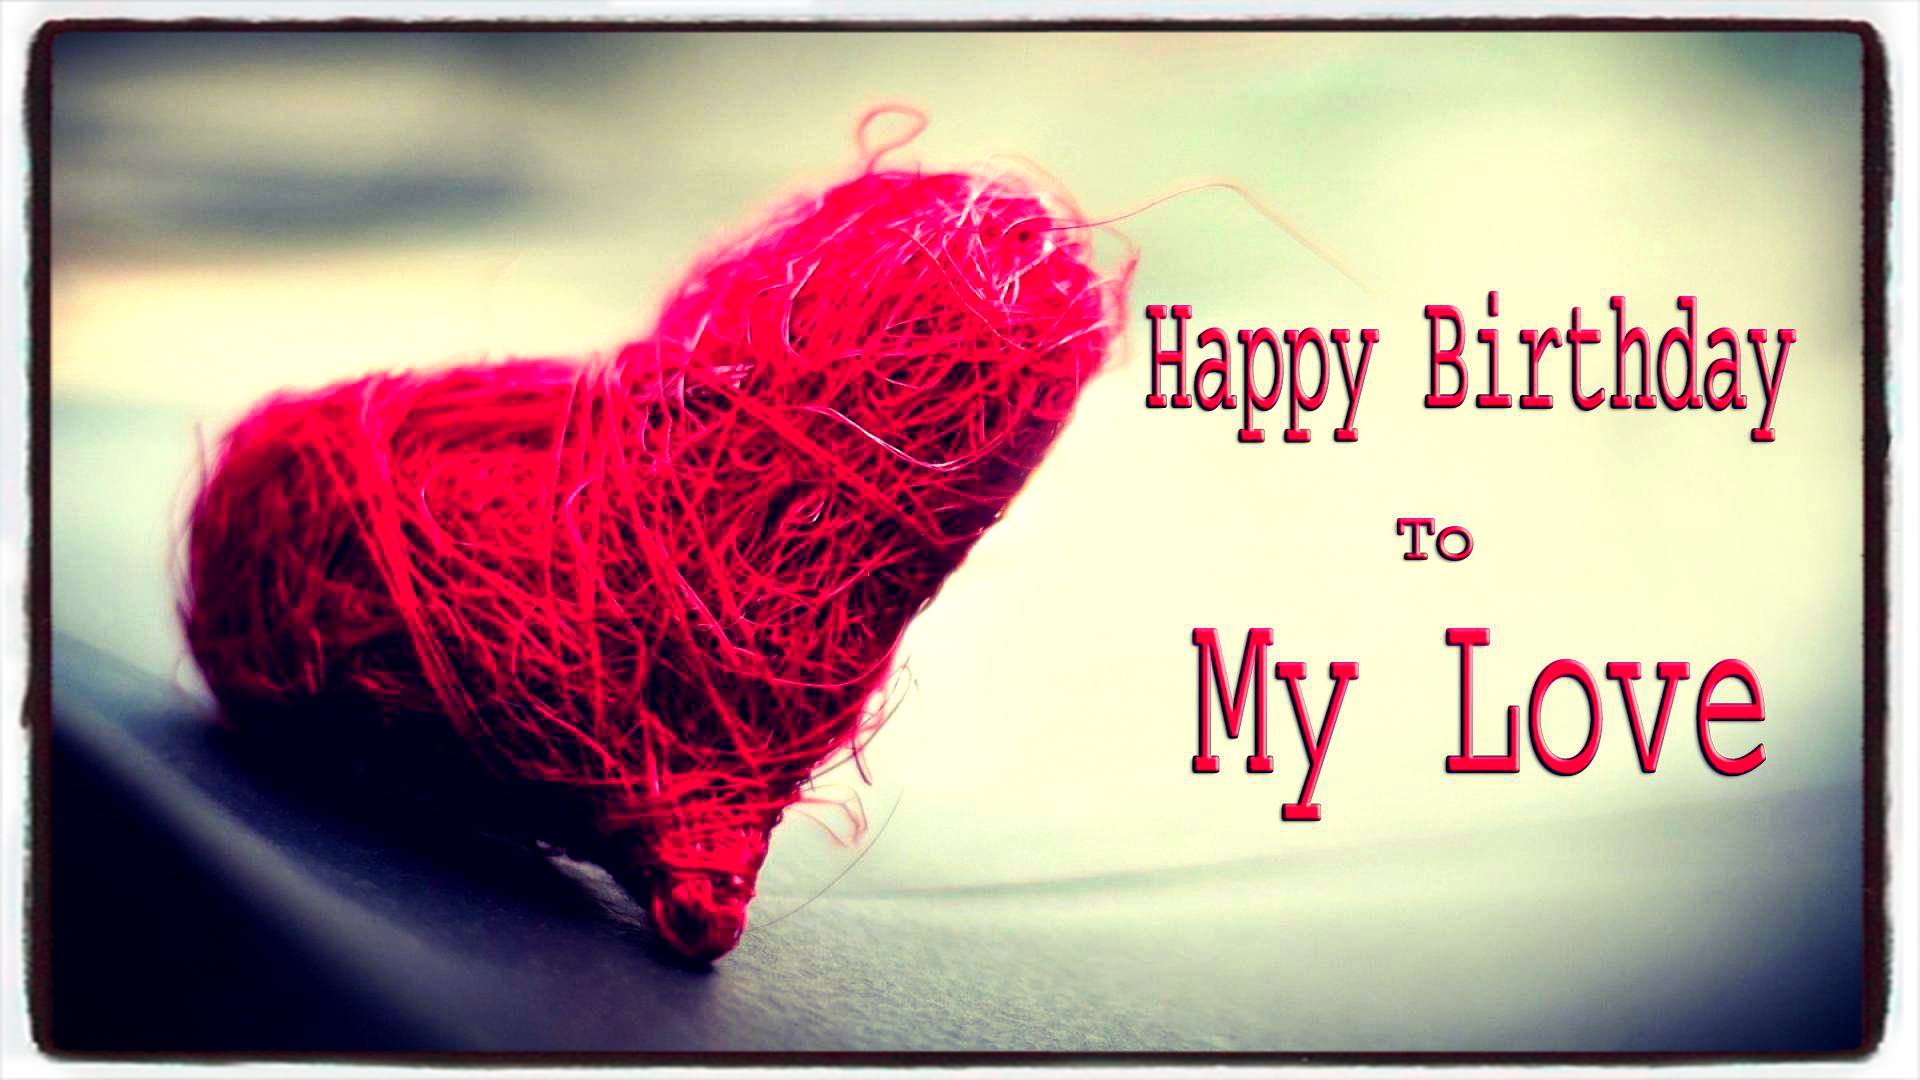 1920x1080 Checkout the great collection of "Happy Birthday To my Love" HD Wallpapers,  SMS, Messages & Quotes and make your big day a Romantic one.